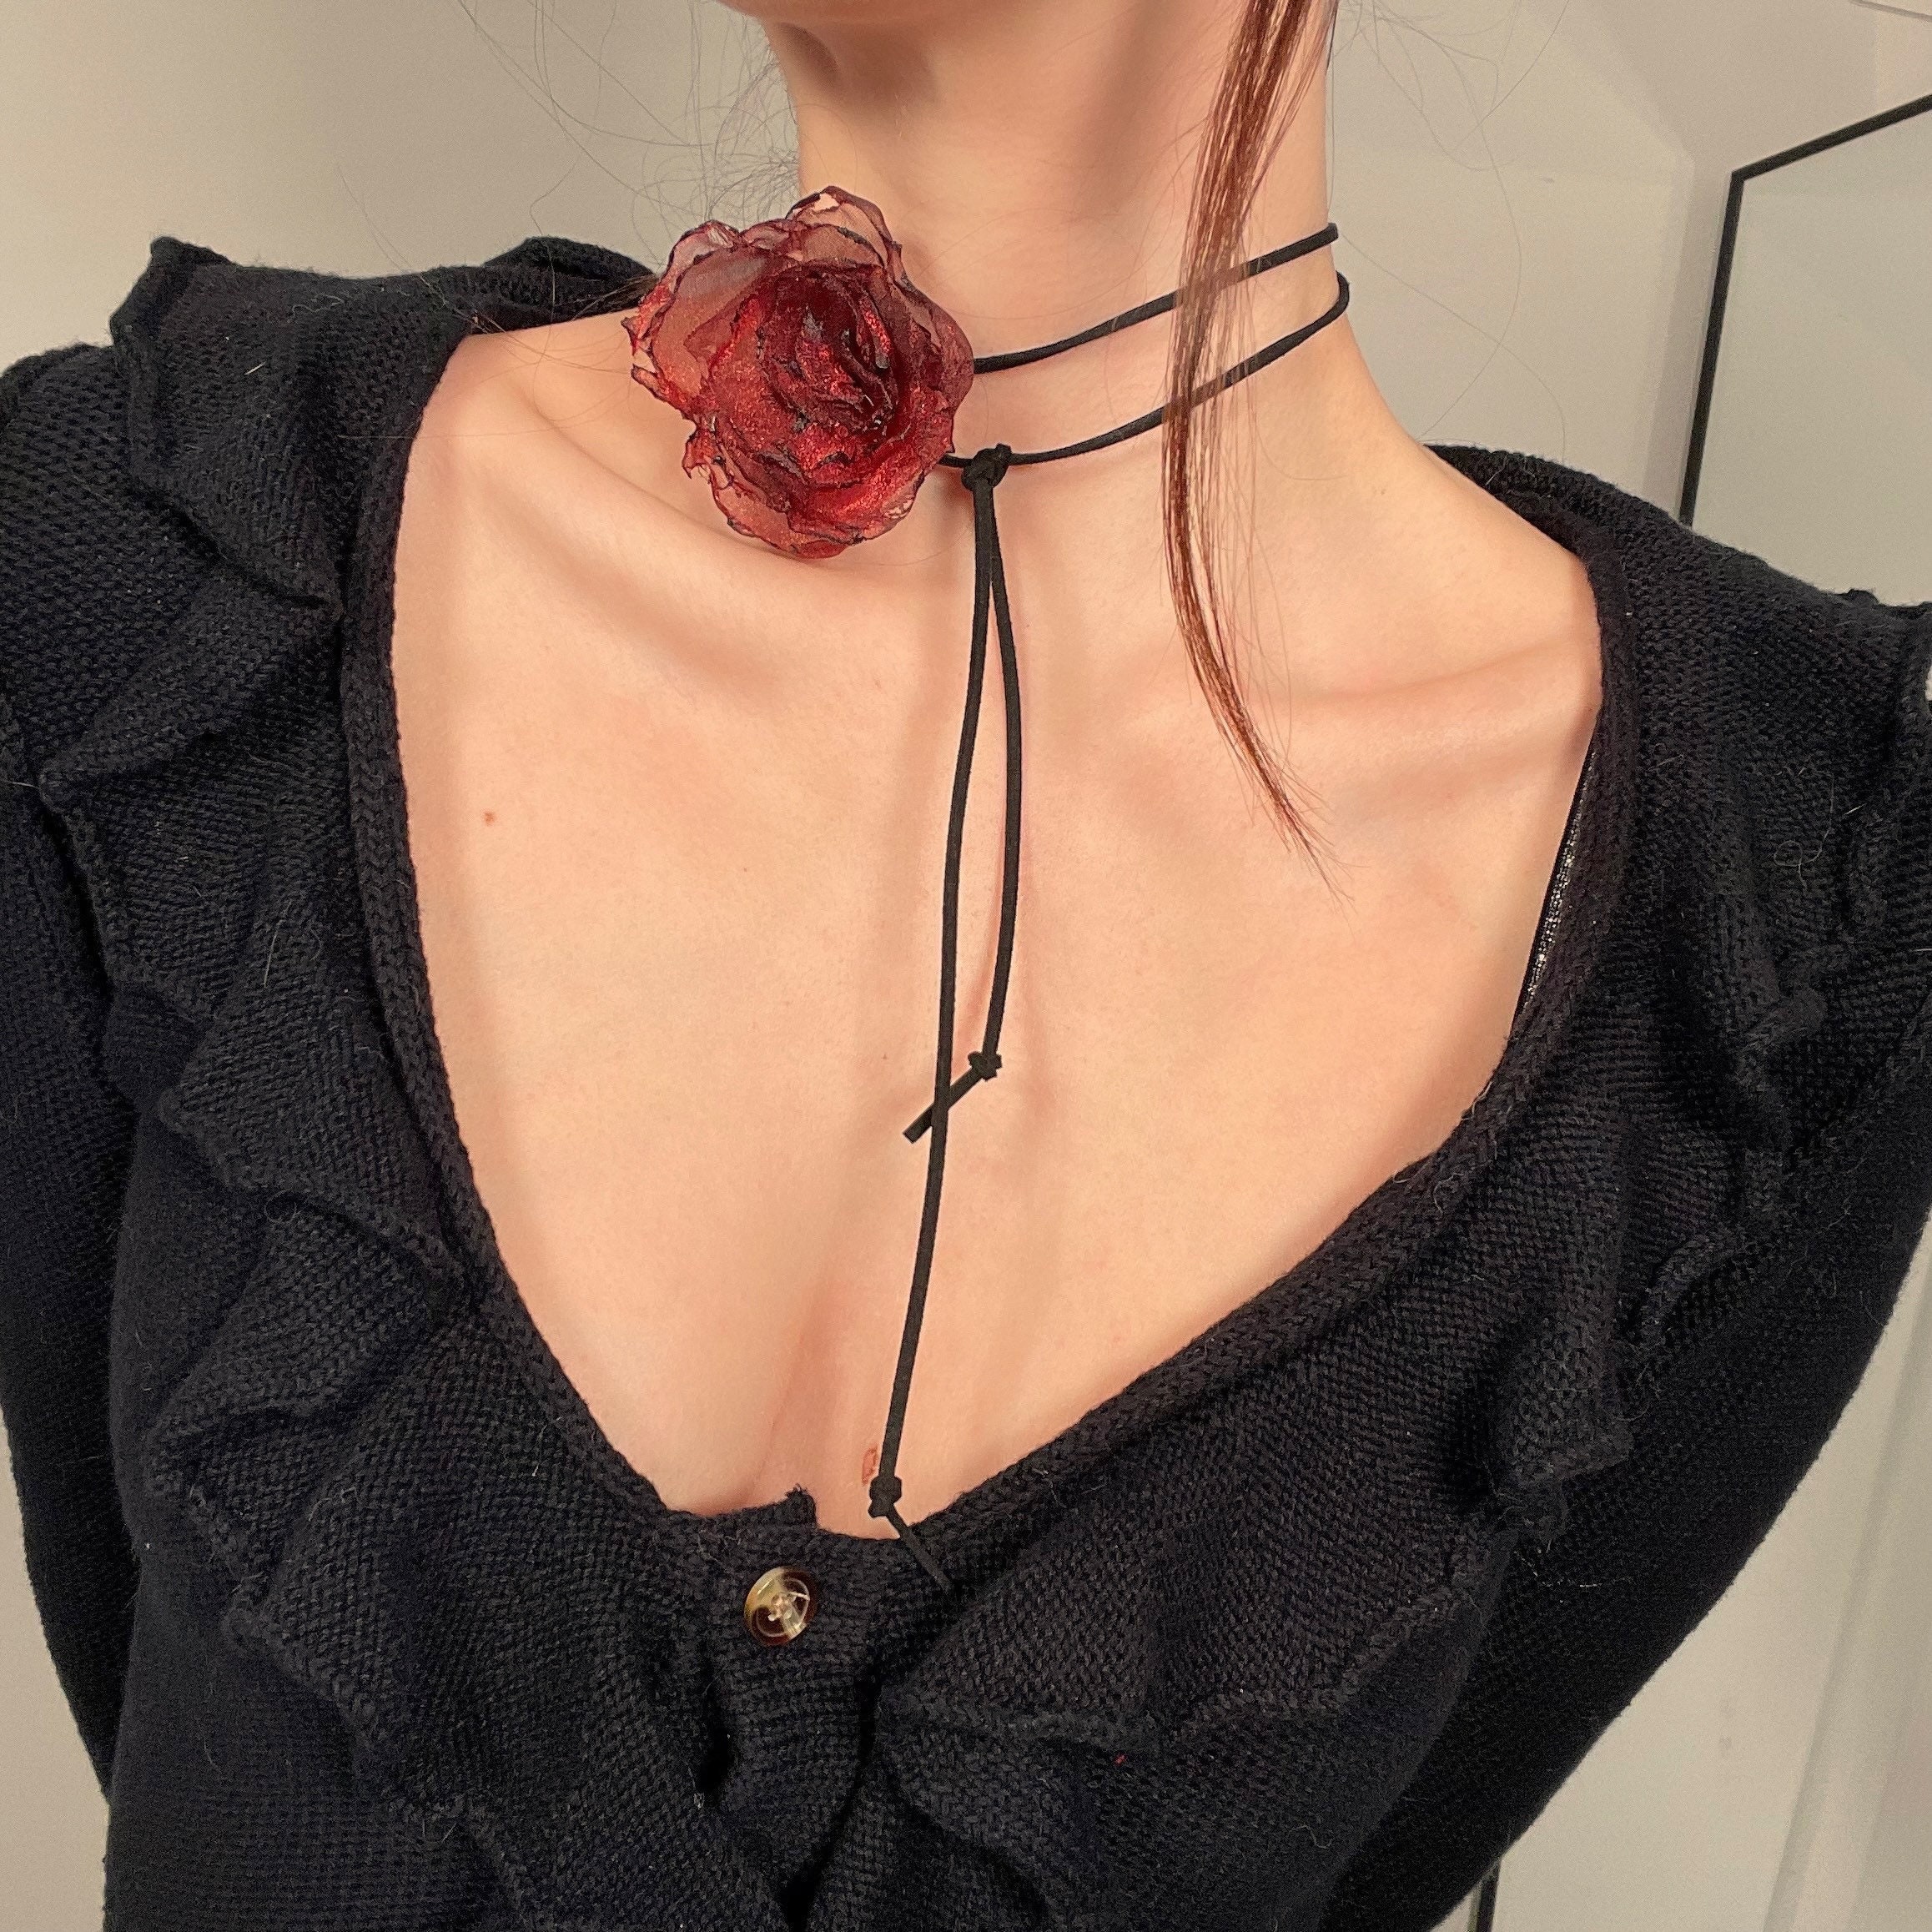 Xerling Red Rose Flower Choker Necklace Black Lace Ribbon Choker Vintage  Victorian Costume Necklaces for Wedding Crystal Beads Pendant Necklaces for